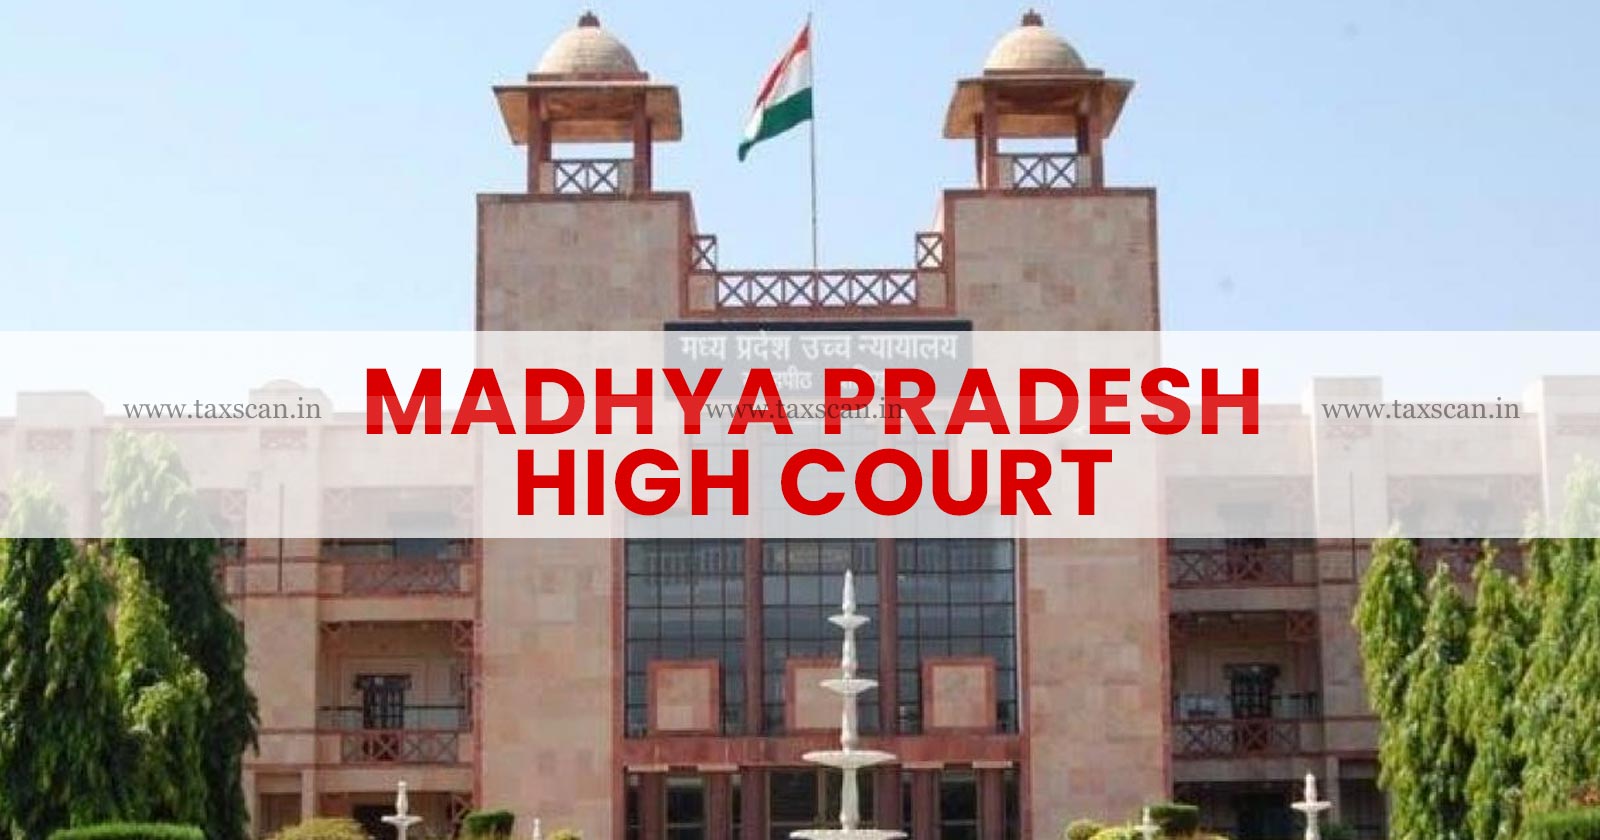 Income Tax - Deceased taxpayer - Reassessment notice - Null and void notice - Madhya Pradesh High Court - taxscan